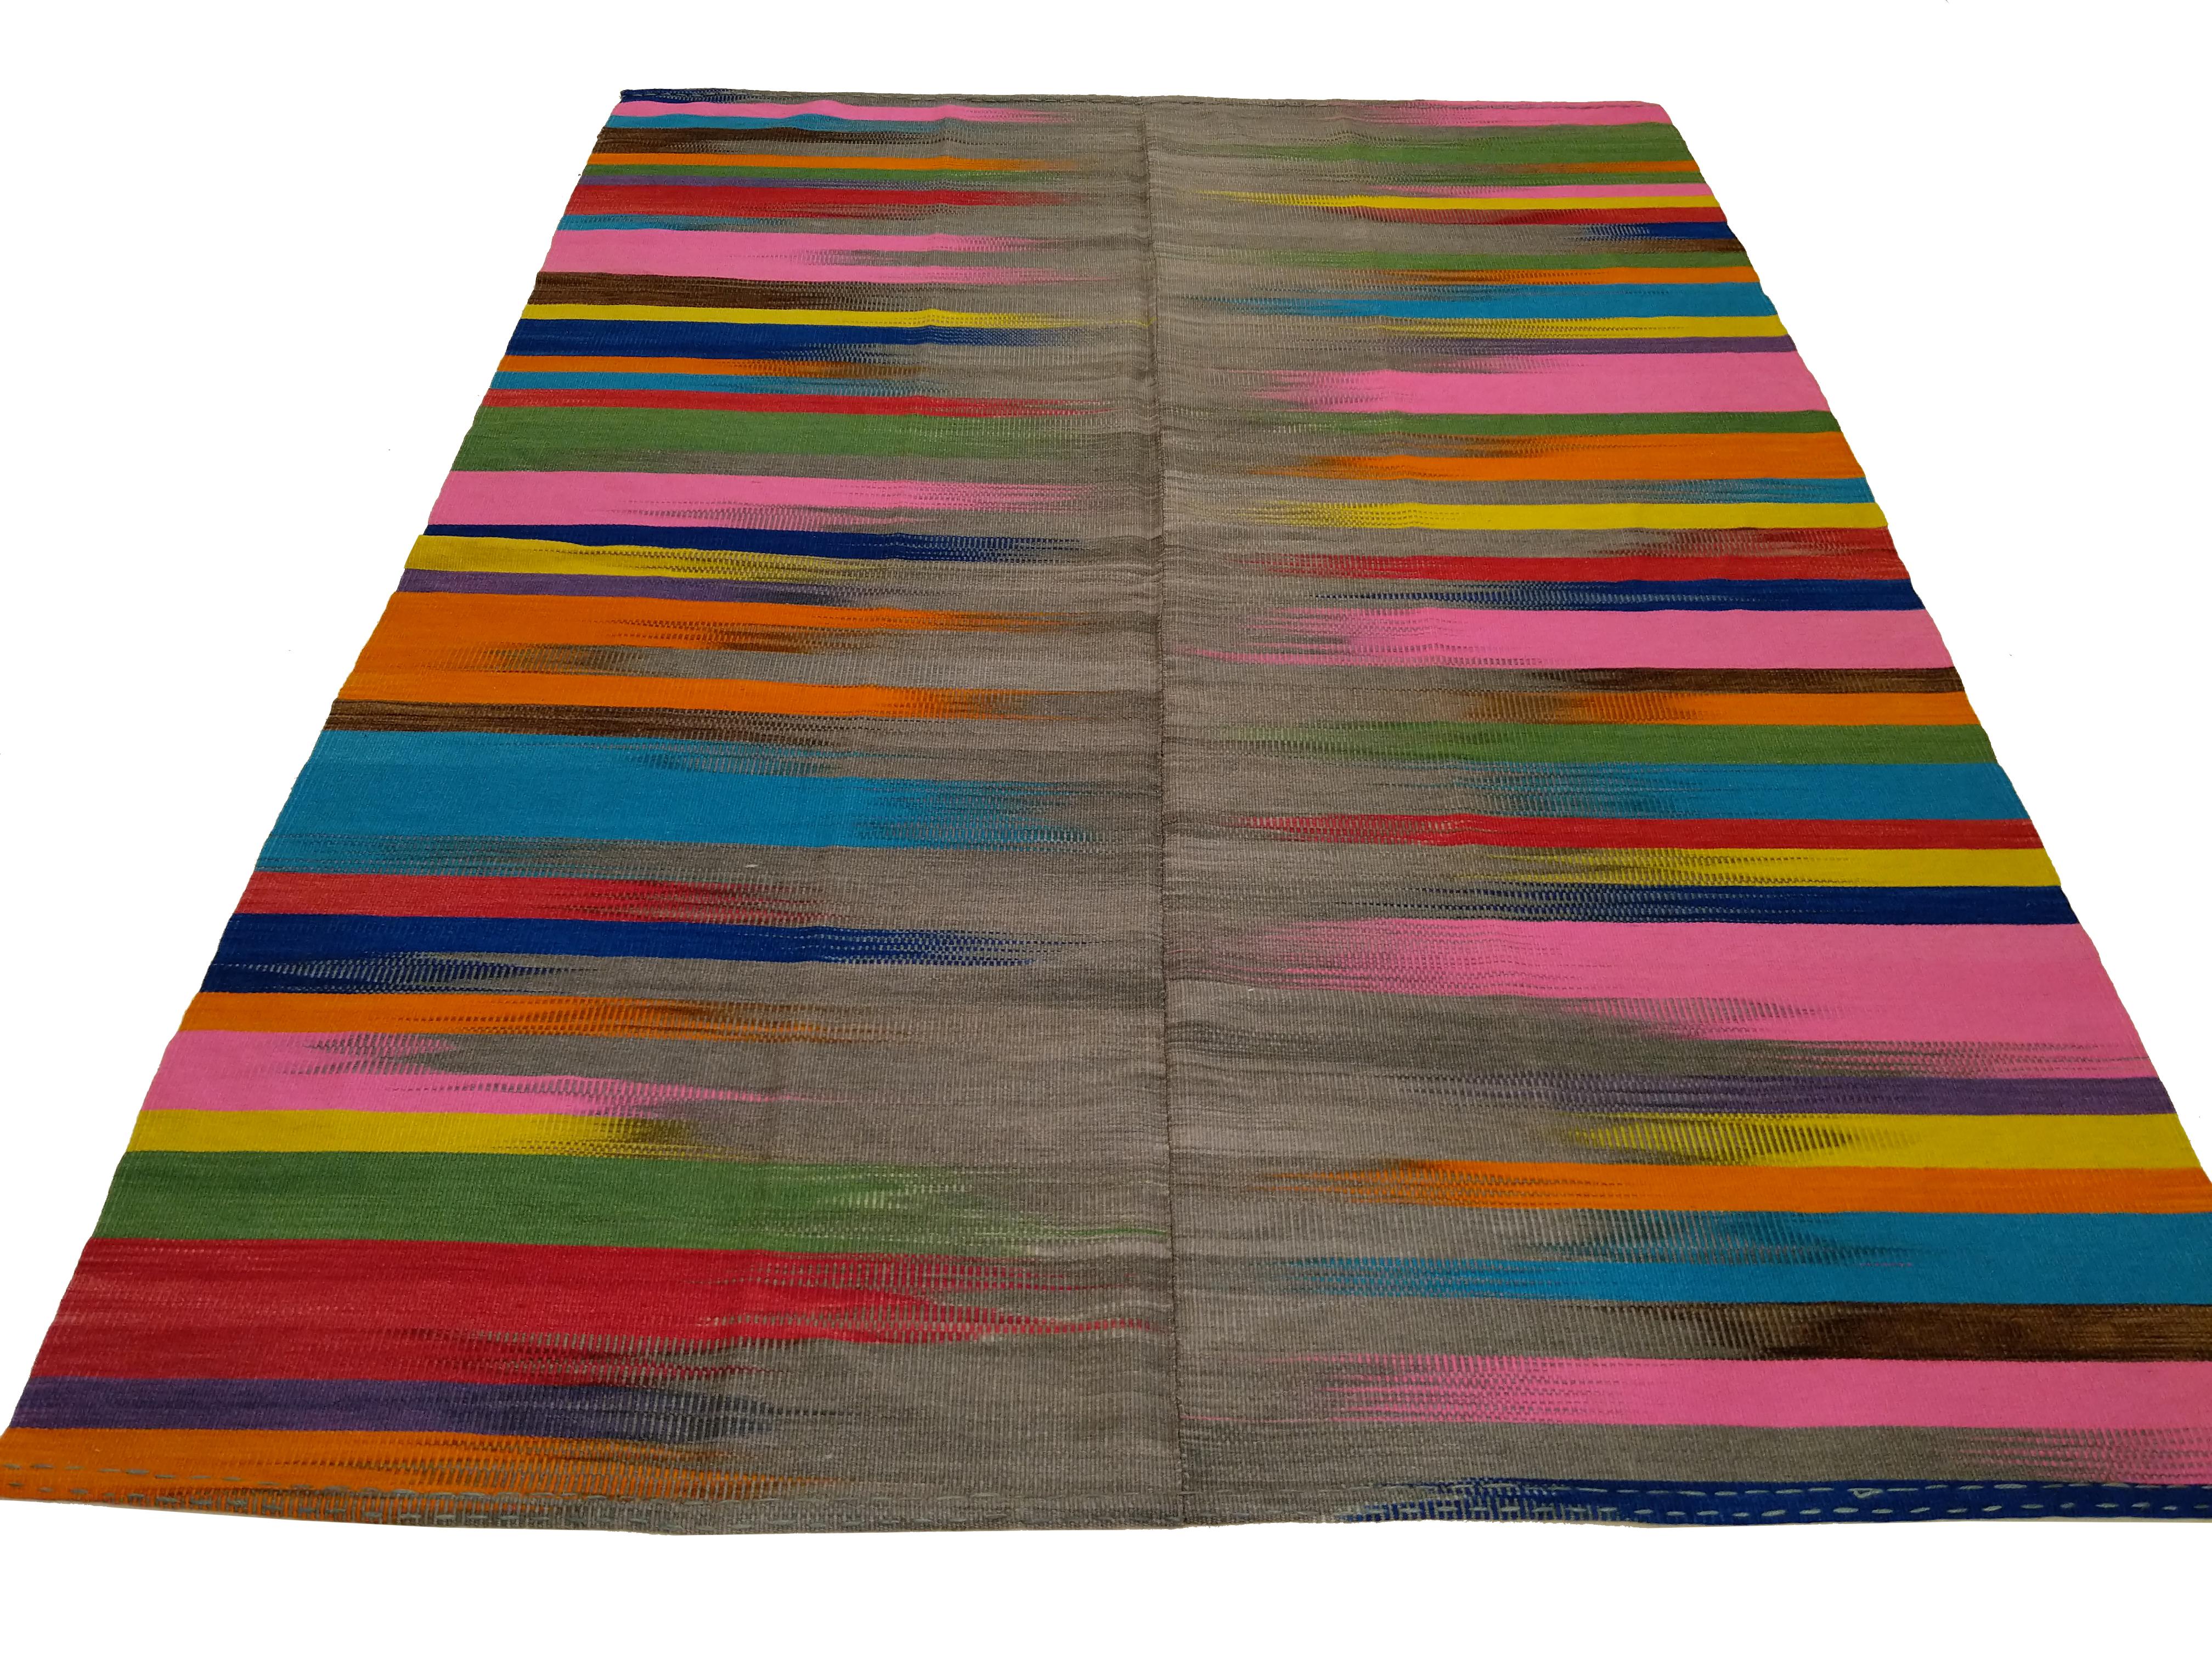 A stunning graphic contemporary Anatolian Kilim of great material quality, distinguished by a light grey wool background punctuated by a dazzling array of rich colors contained in flame-like brushstrokes, expertly handwoven to contrast. Truly a 21st